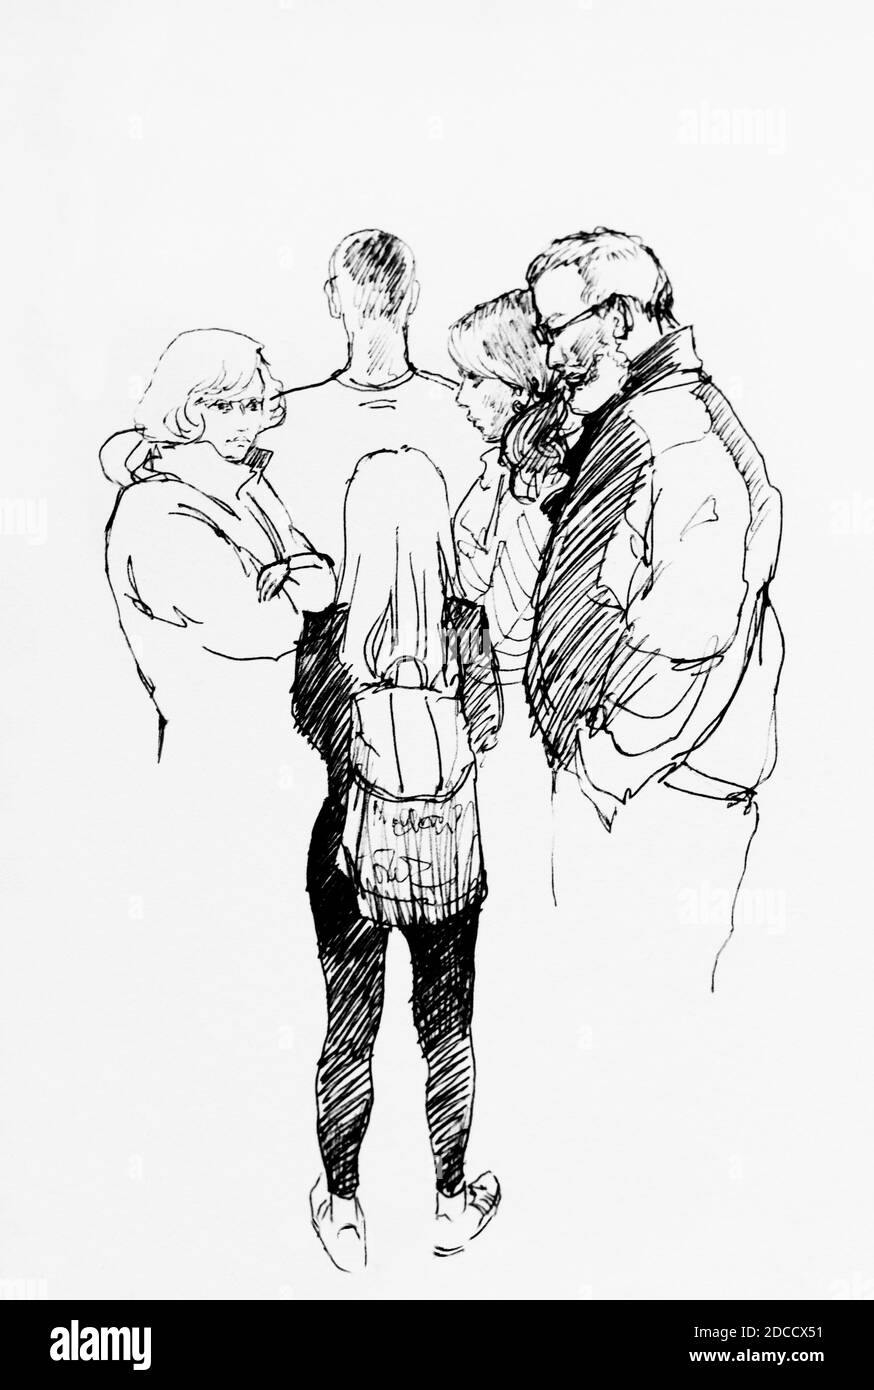 Family conversation during awaiting in the line to access, grumpy girl with backpack against their relatives lineart sketch drawing Stock Photo